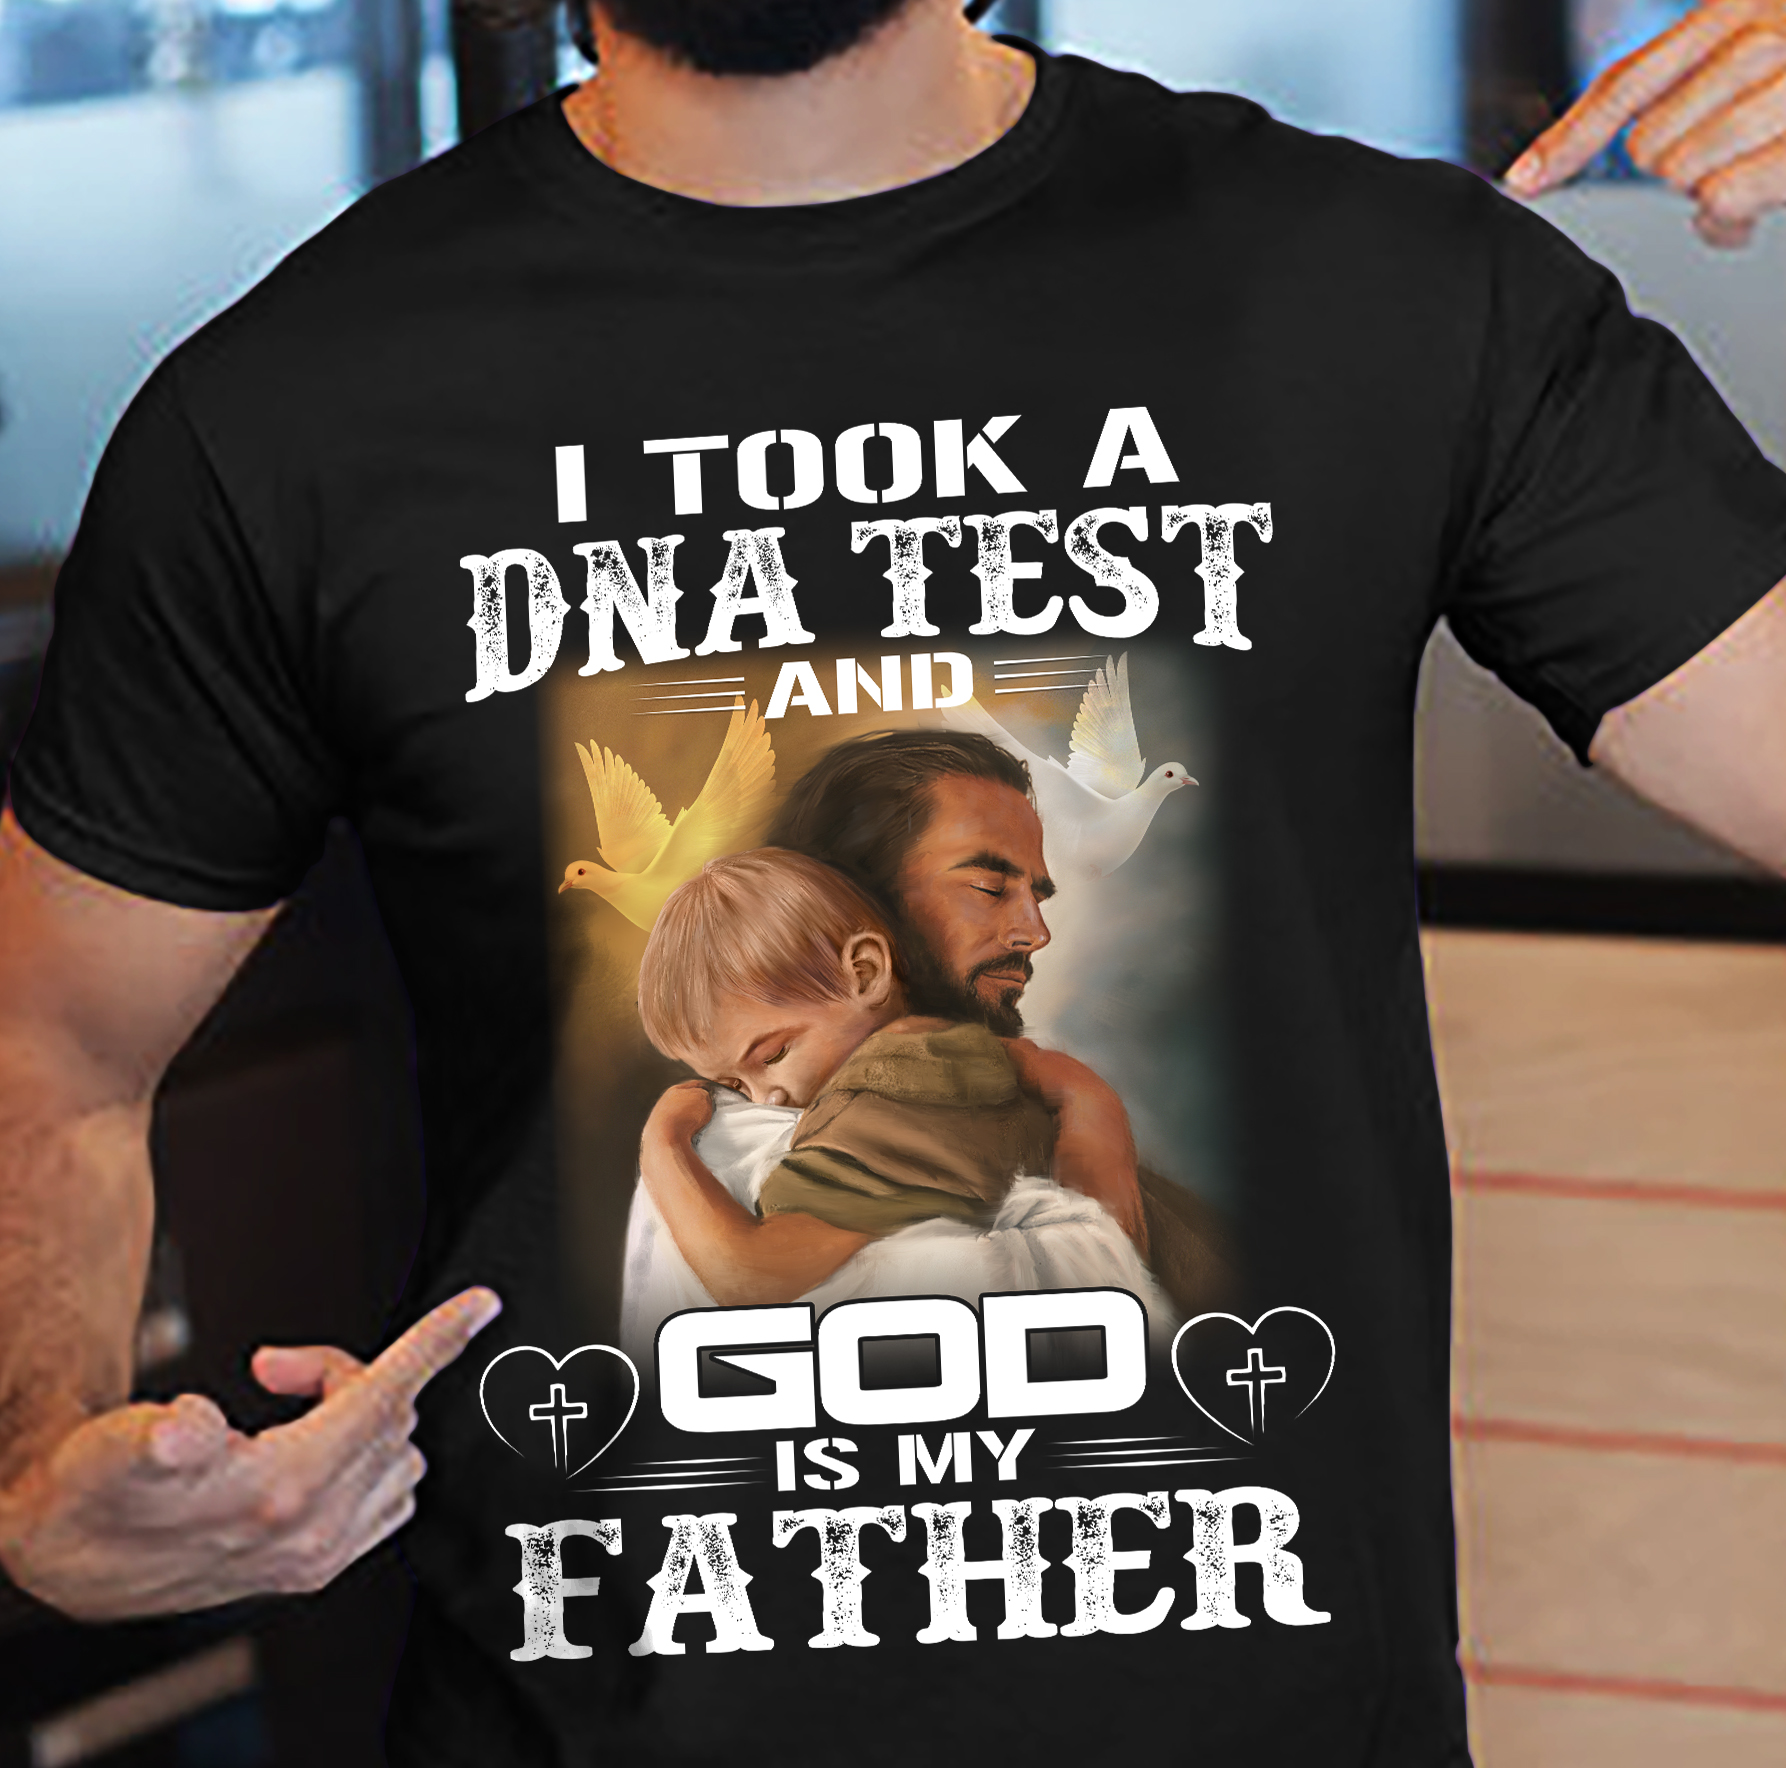 I took DNA test and god is my father